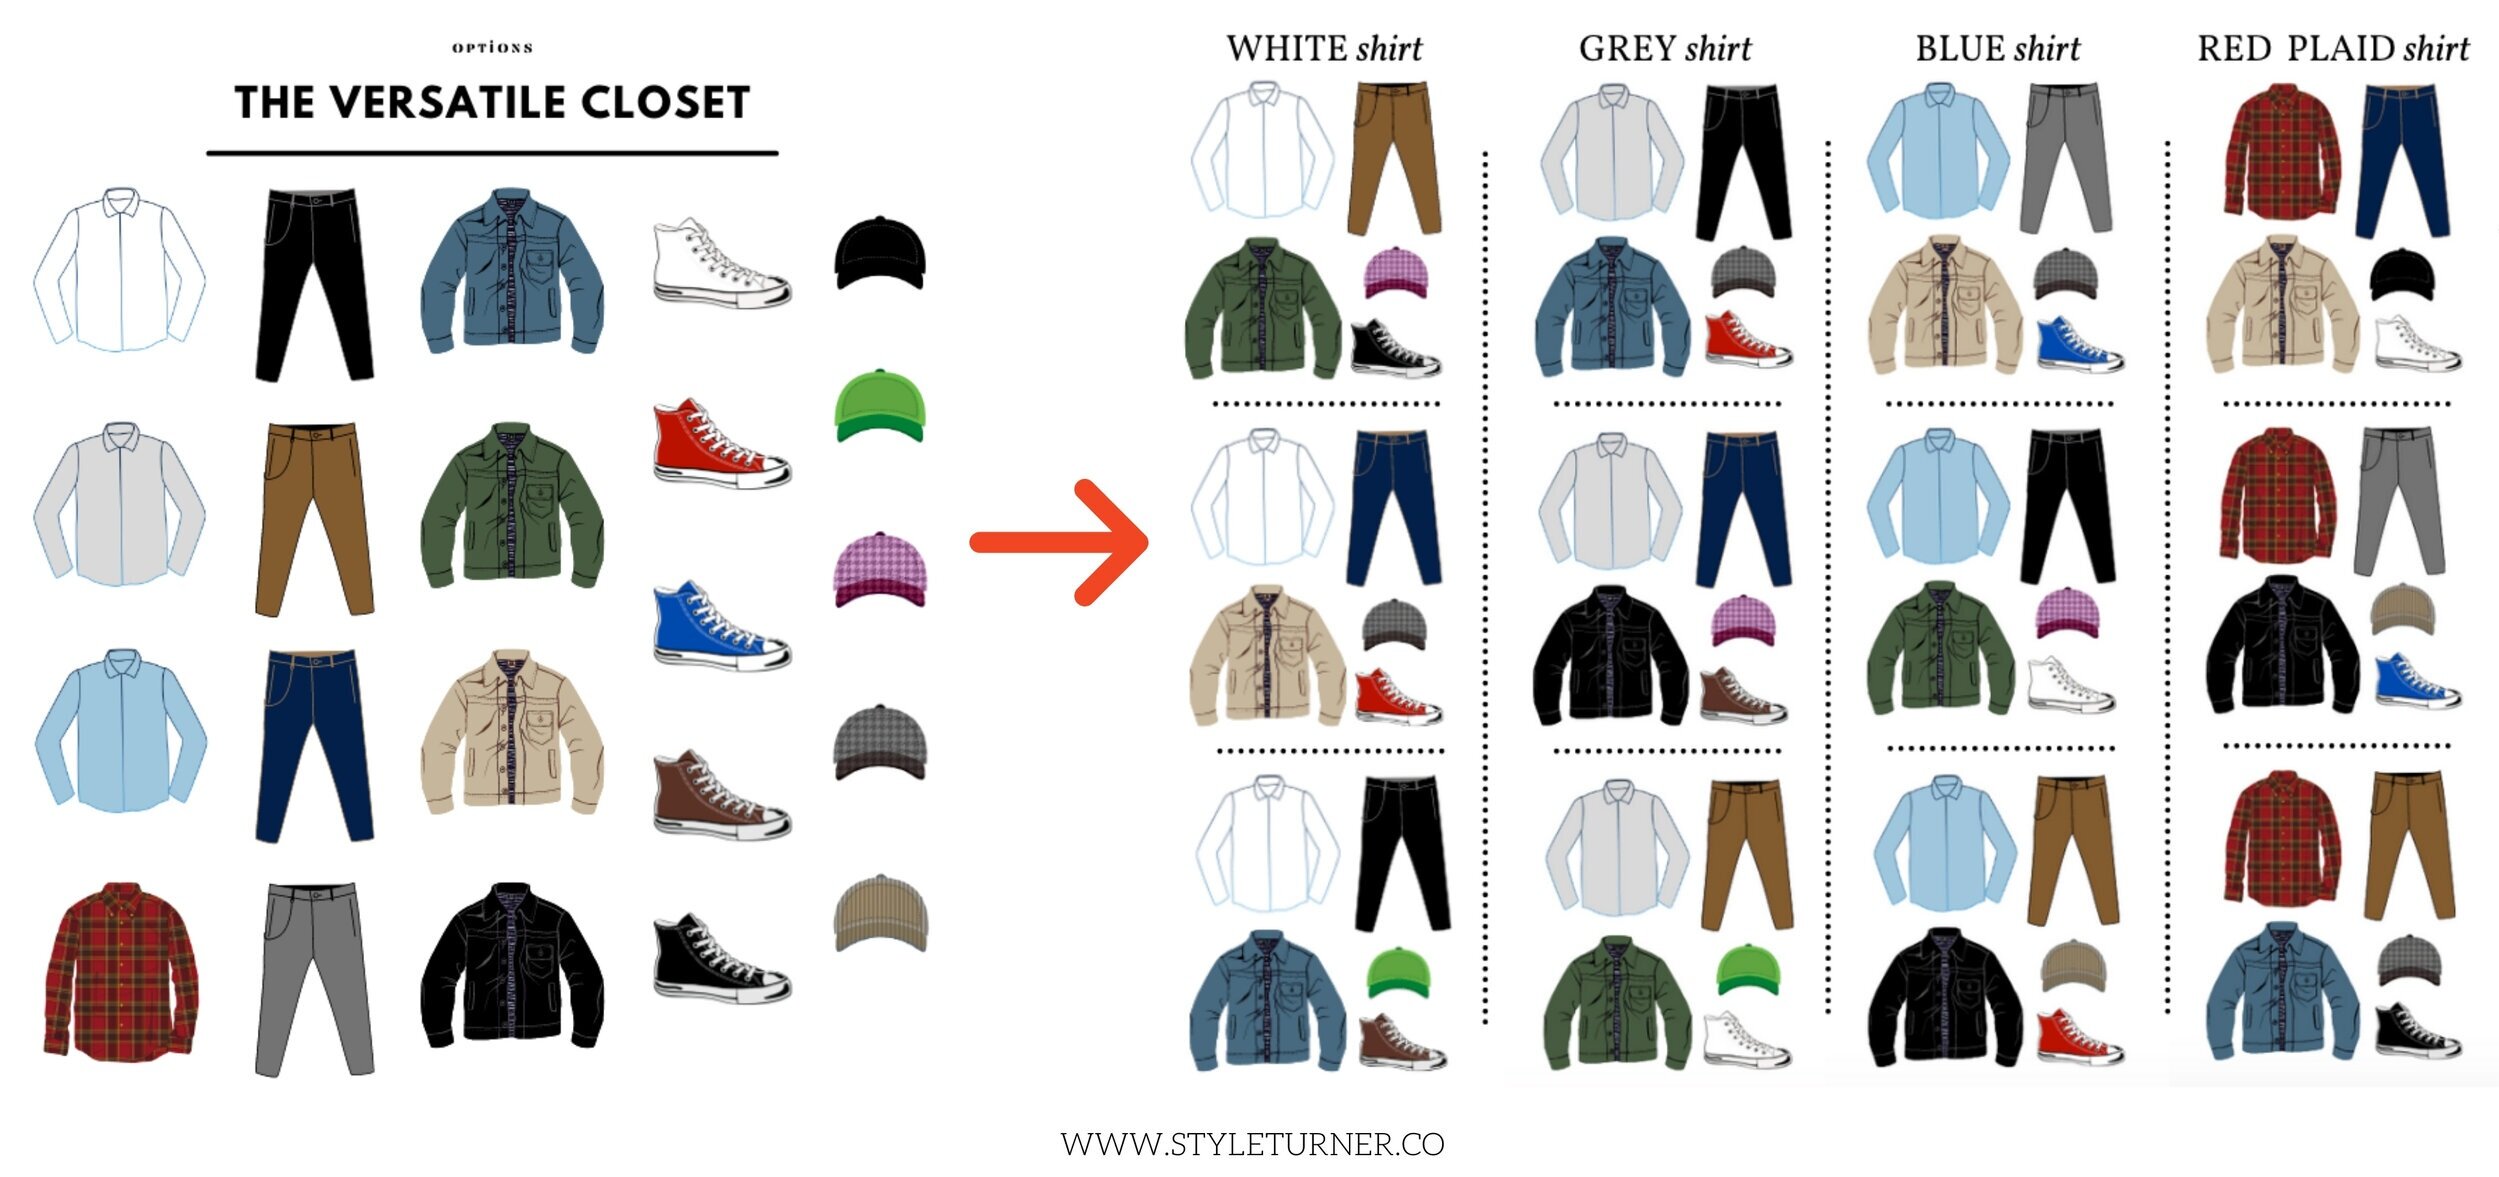 How To Match Clothing And Color For Men